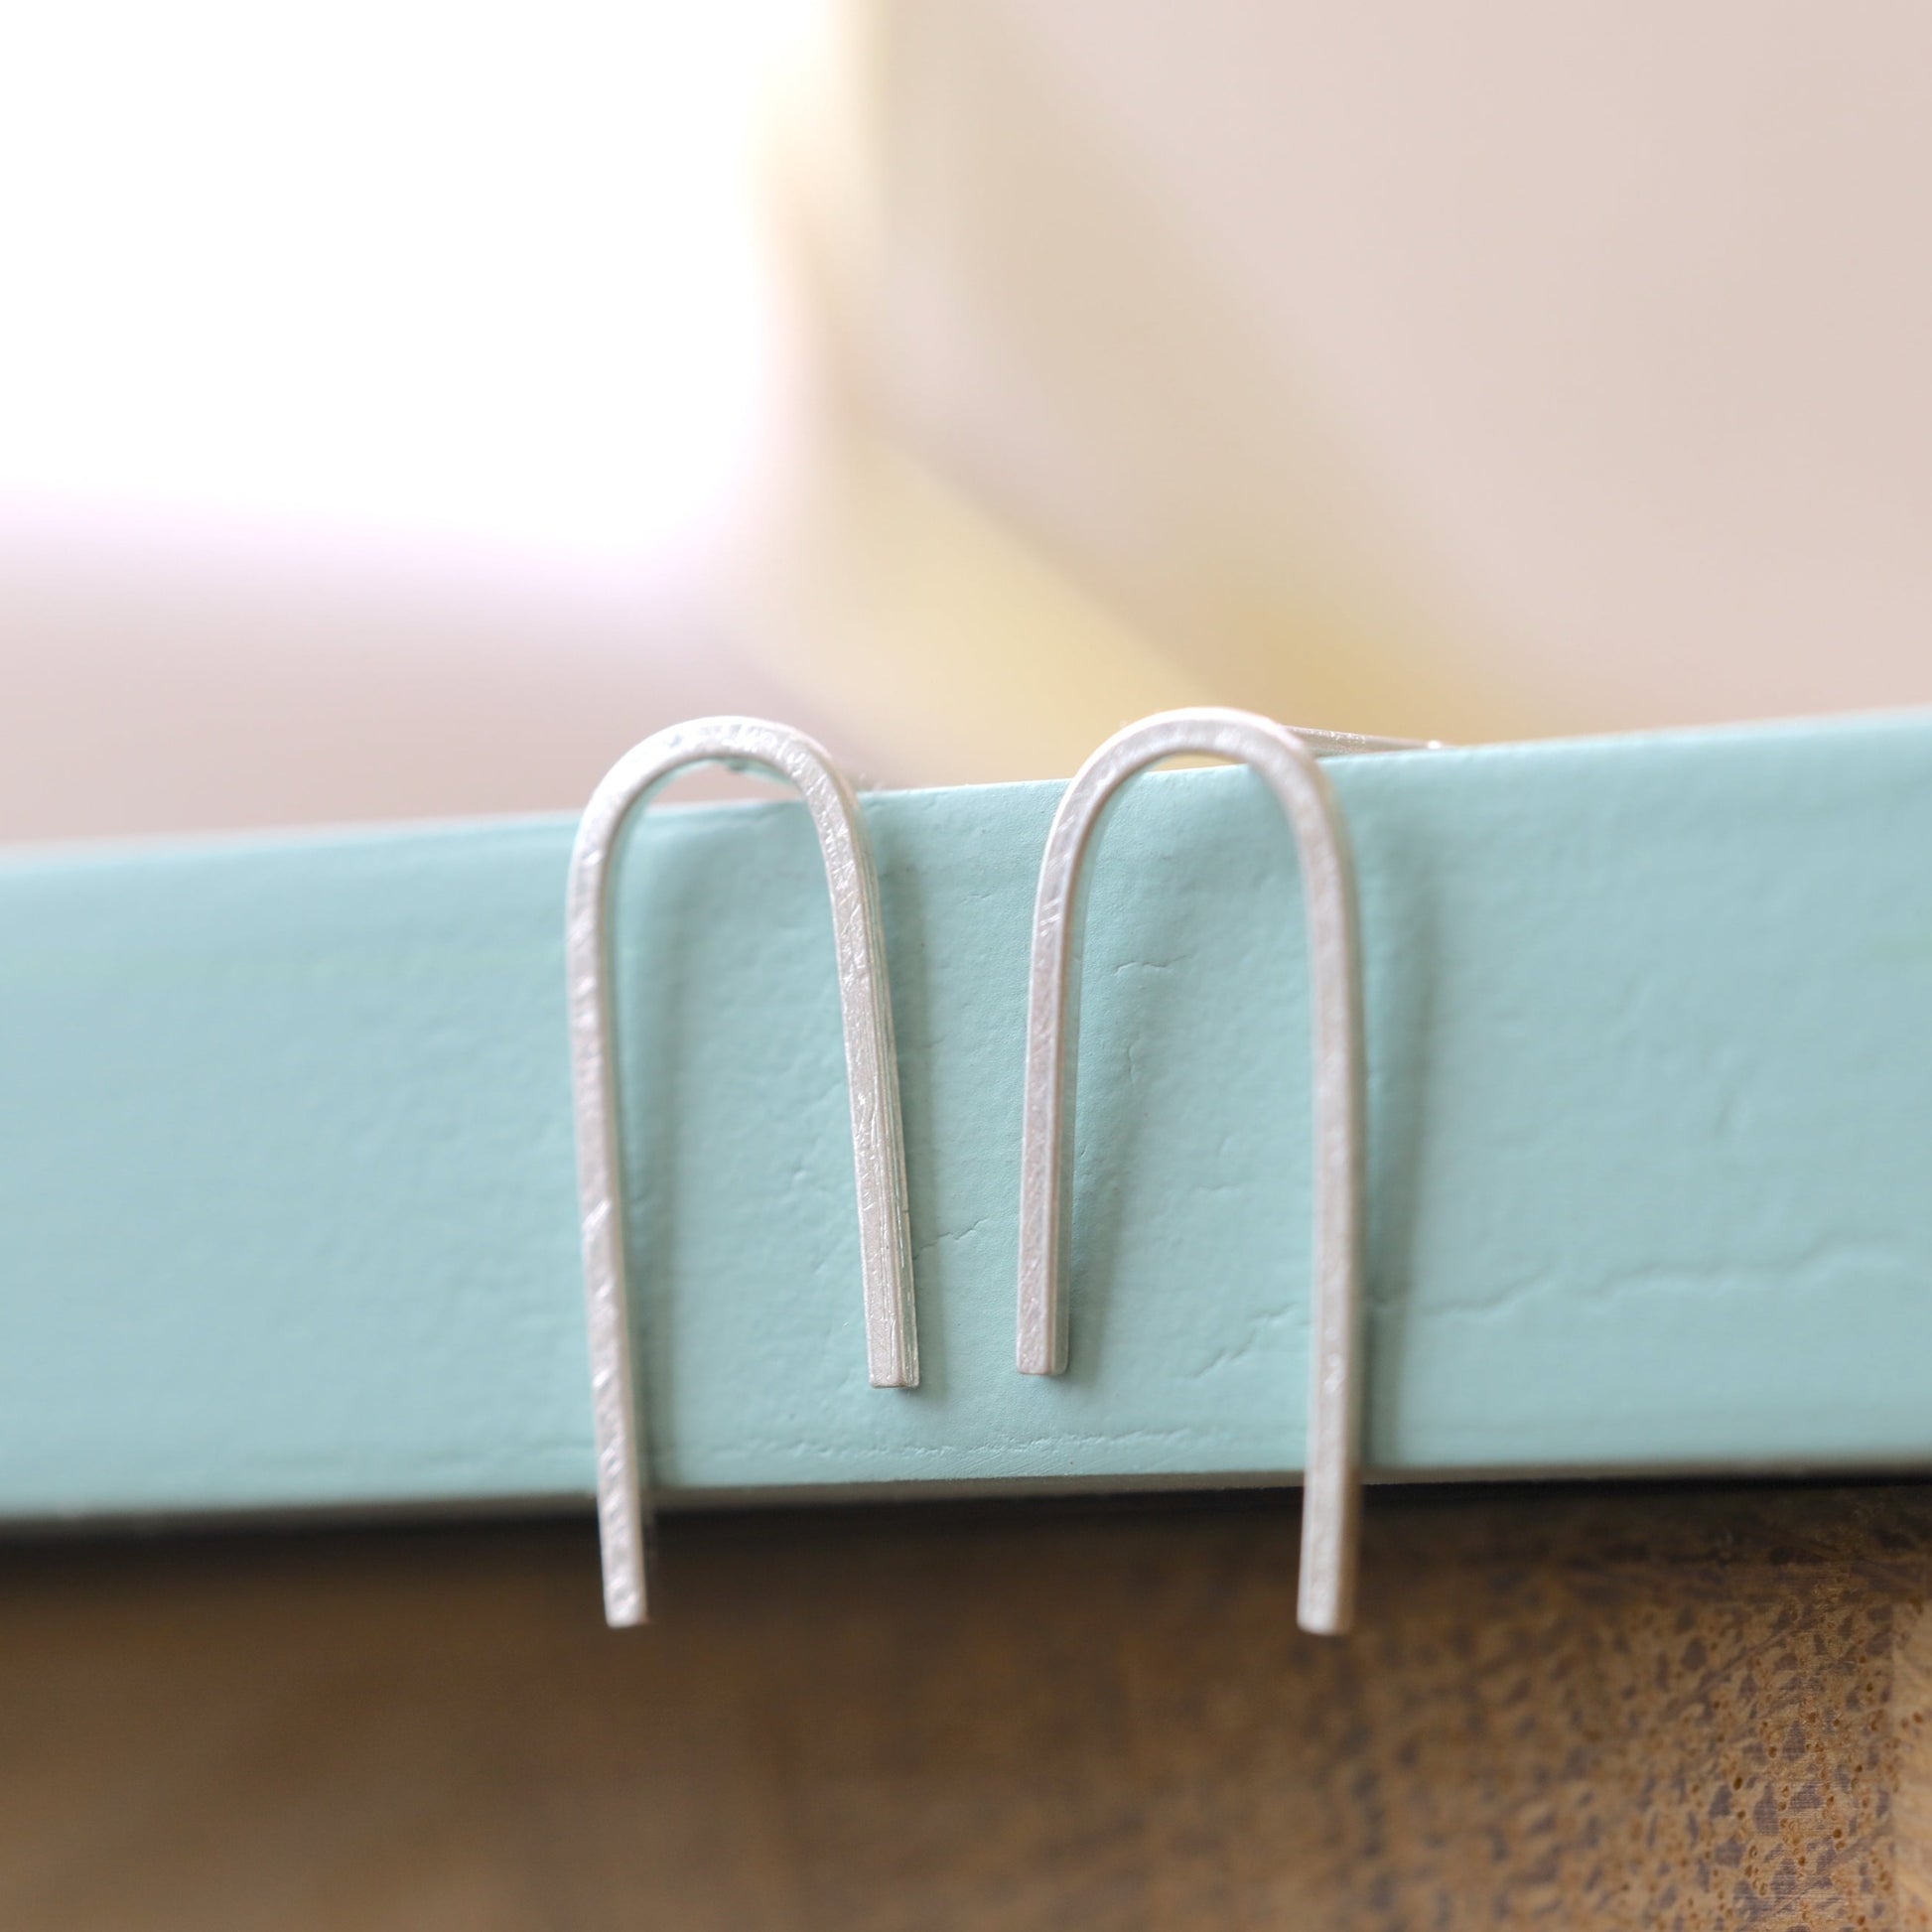 Sterling silver arch stud earrings close up